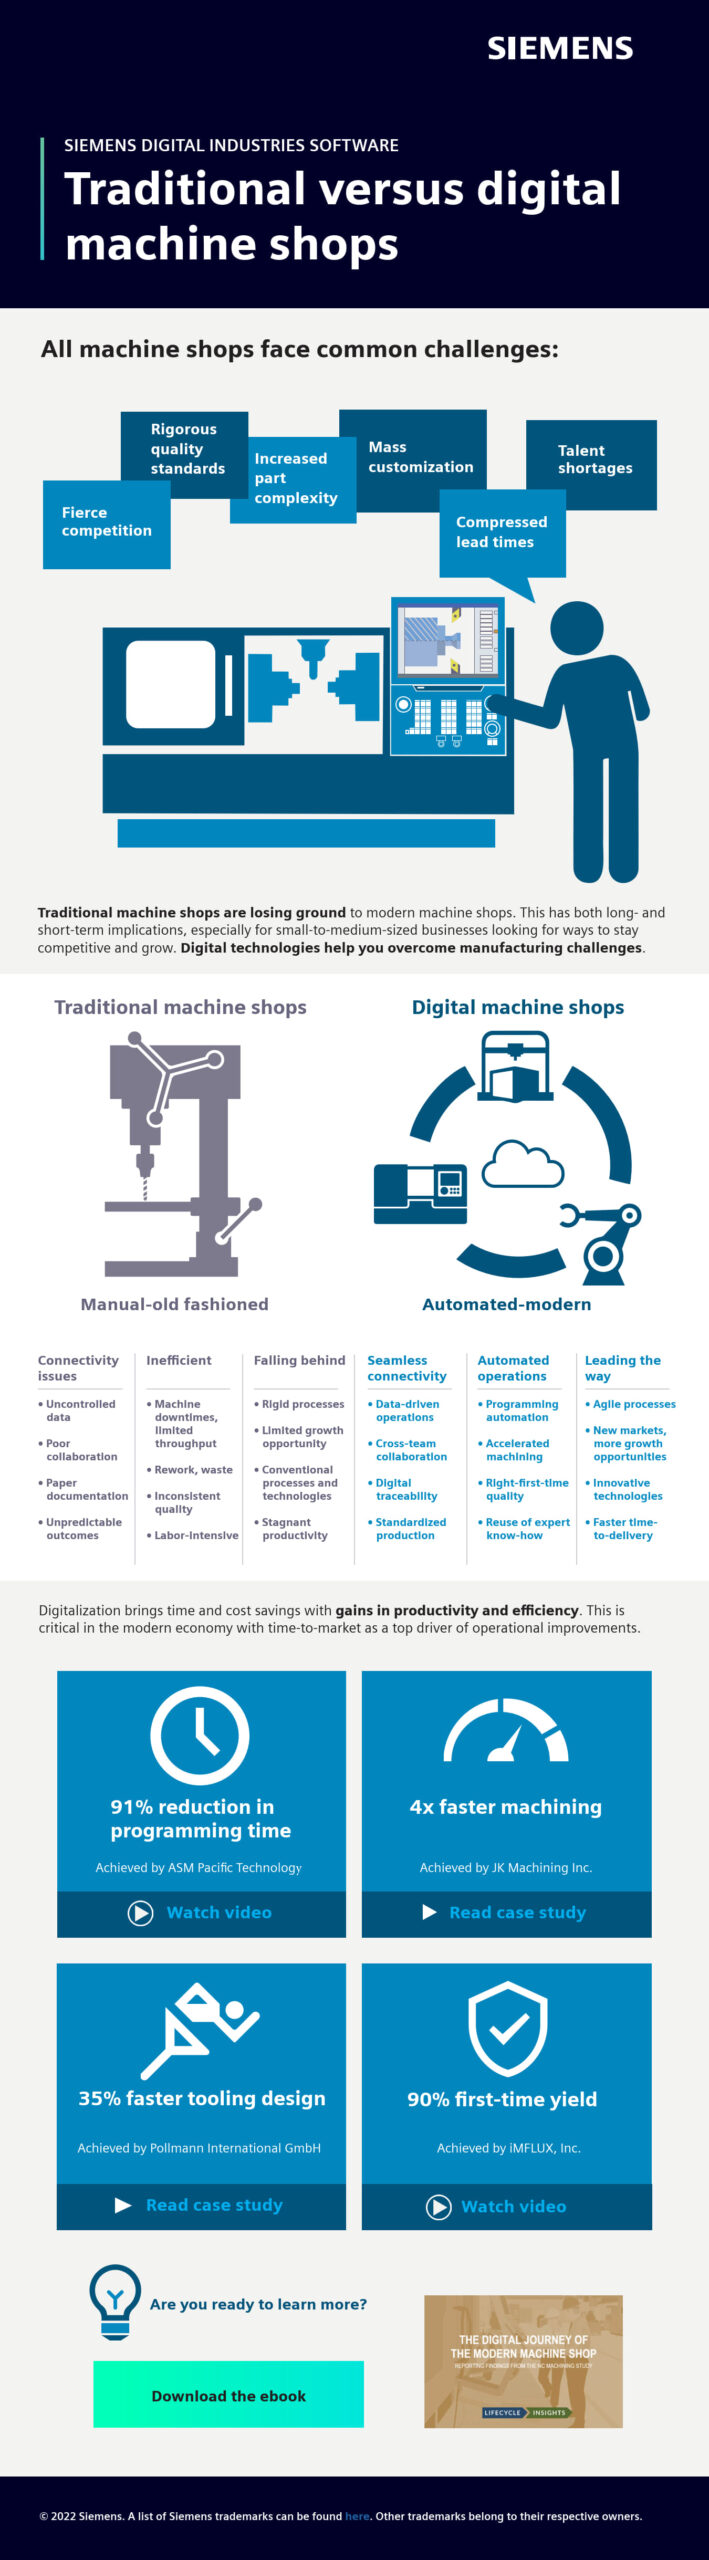 An infographic outlining the differences between traditional and modern machine shops